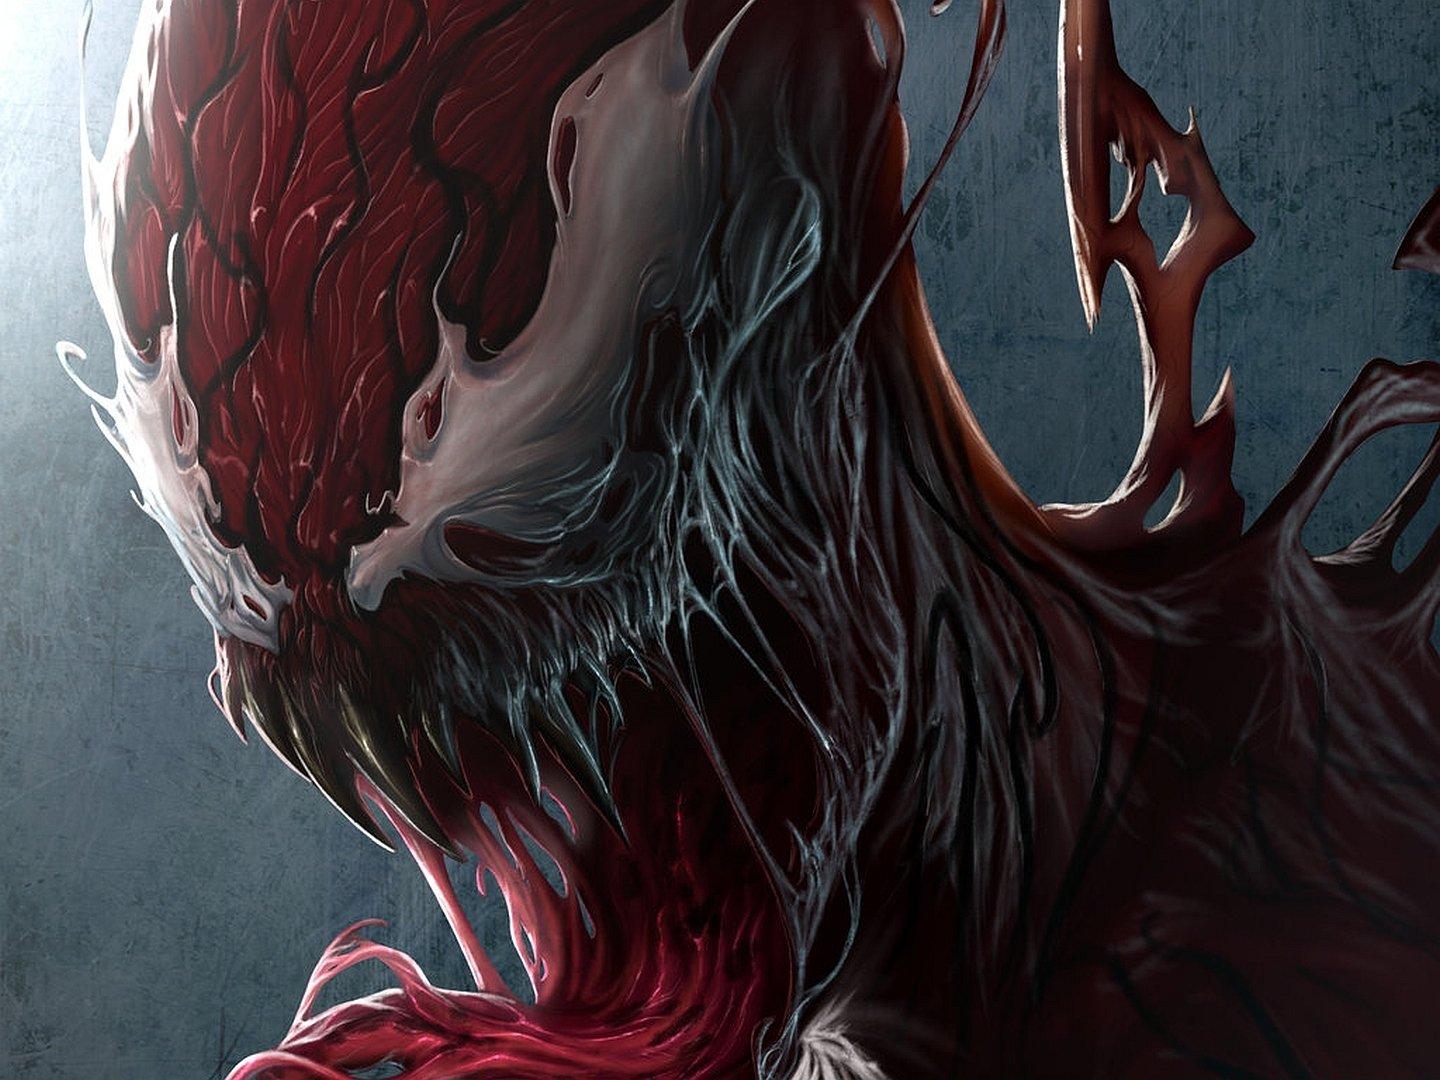 1440 x 1080 · jpeg - Carnage Wallpaper and Background Image | 1440x1080 | ID:374561